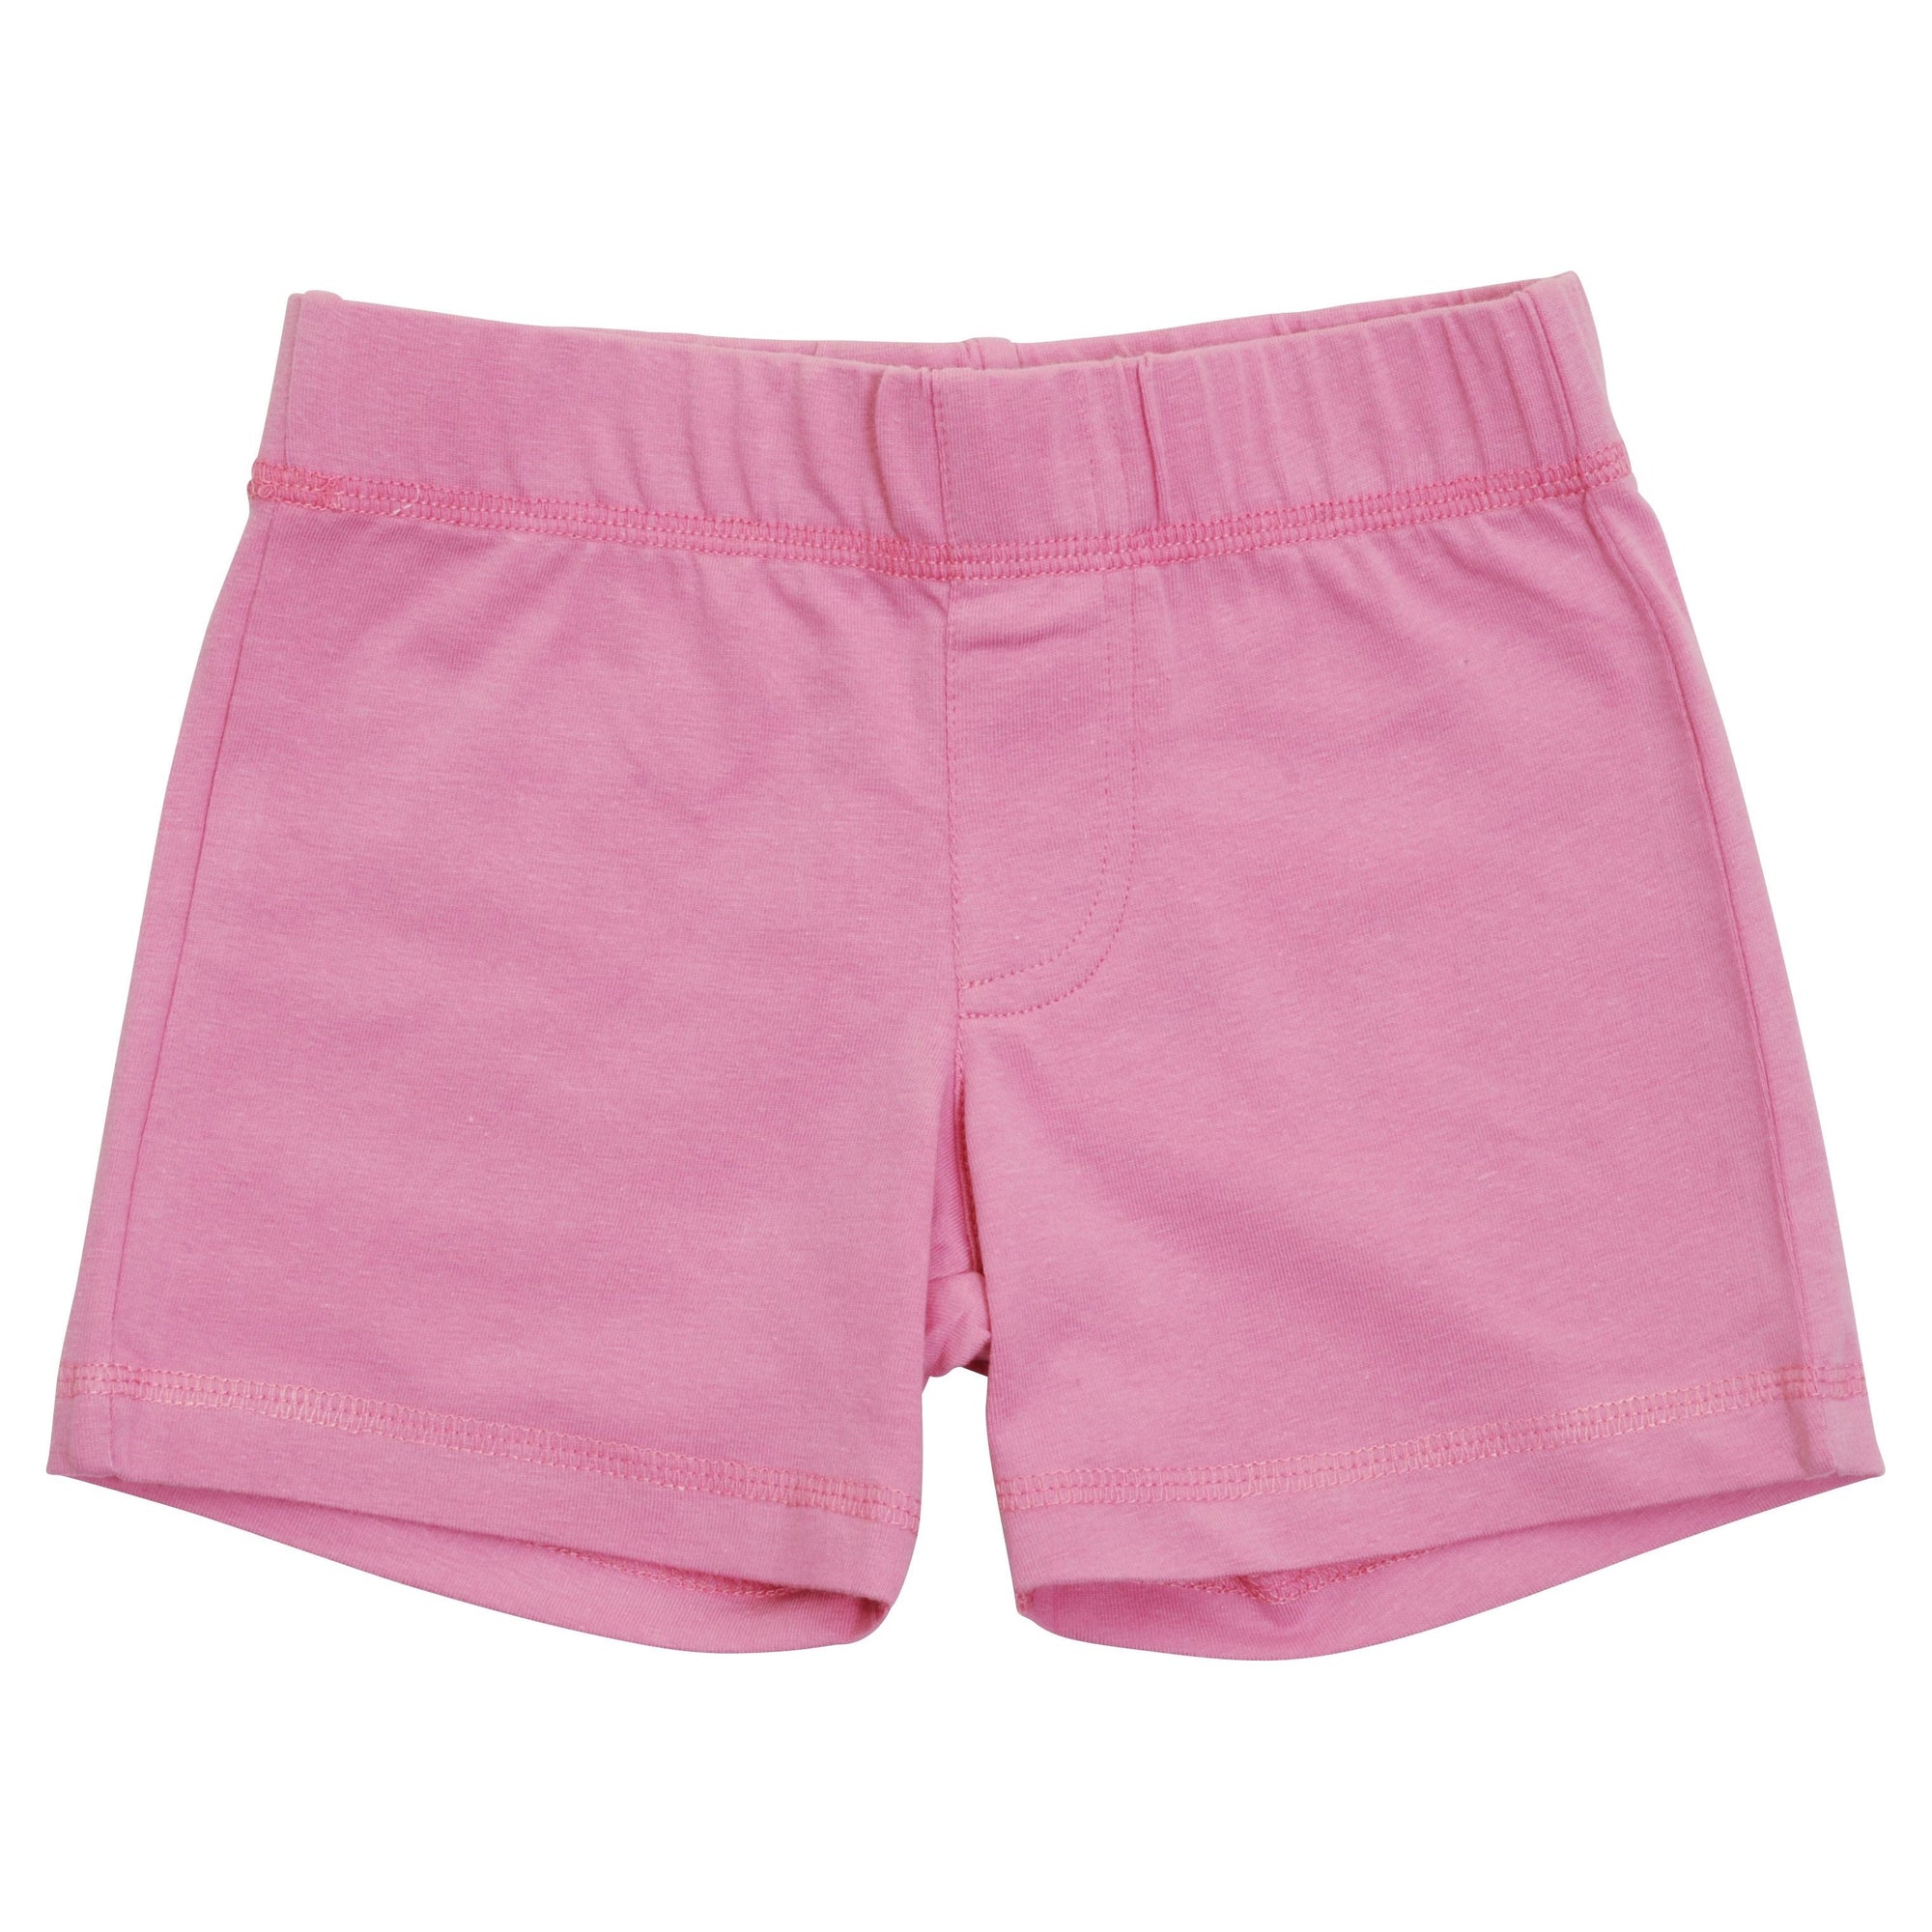 Fuchsia Pink Shorts - 2 Left Size 10-12 & 12-14 years-More Than A Fling-Modern Rascals